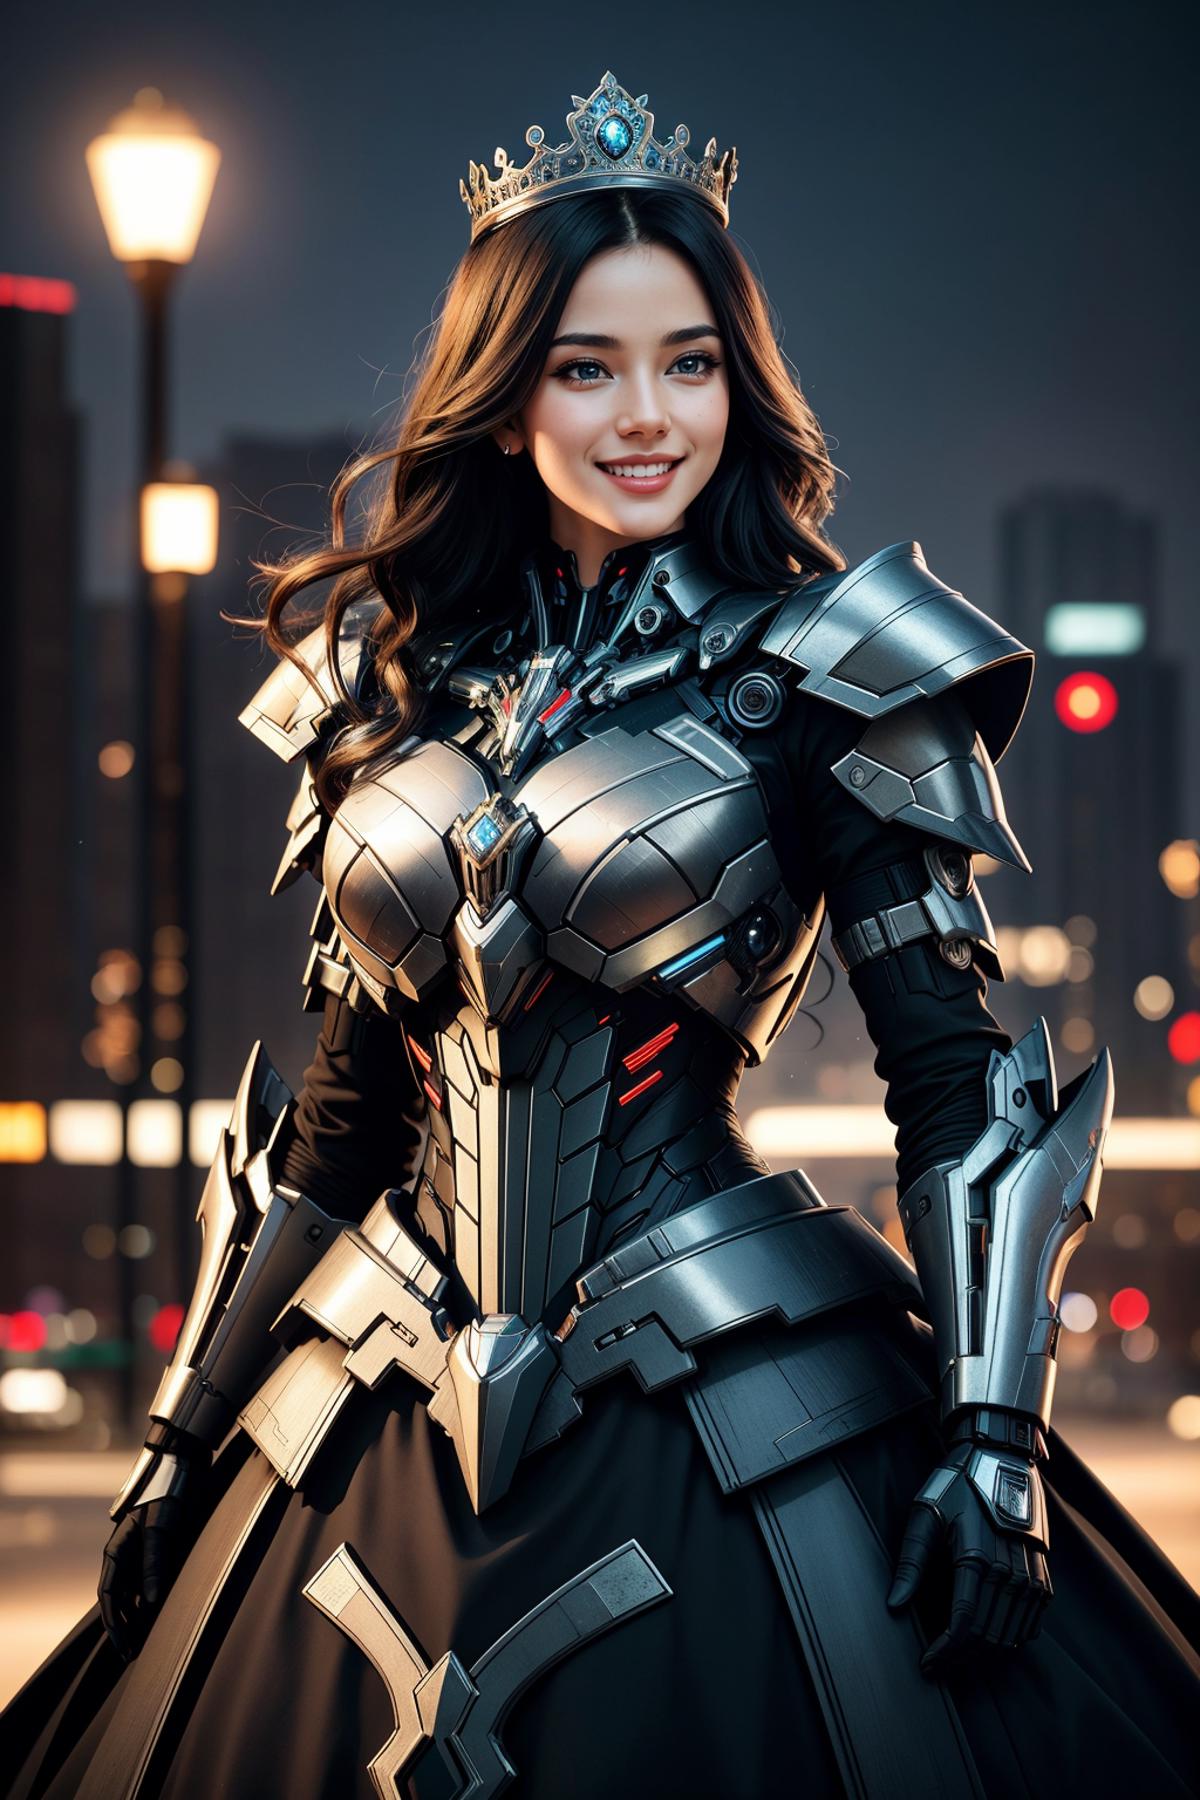 A woman in a futuristic armor and helmet standing in front of a city skyline.